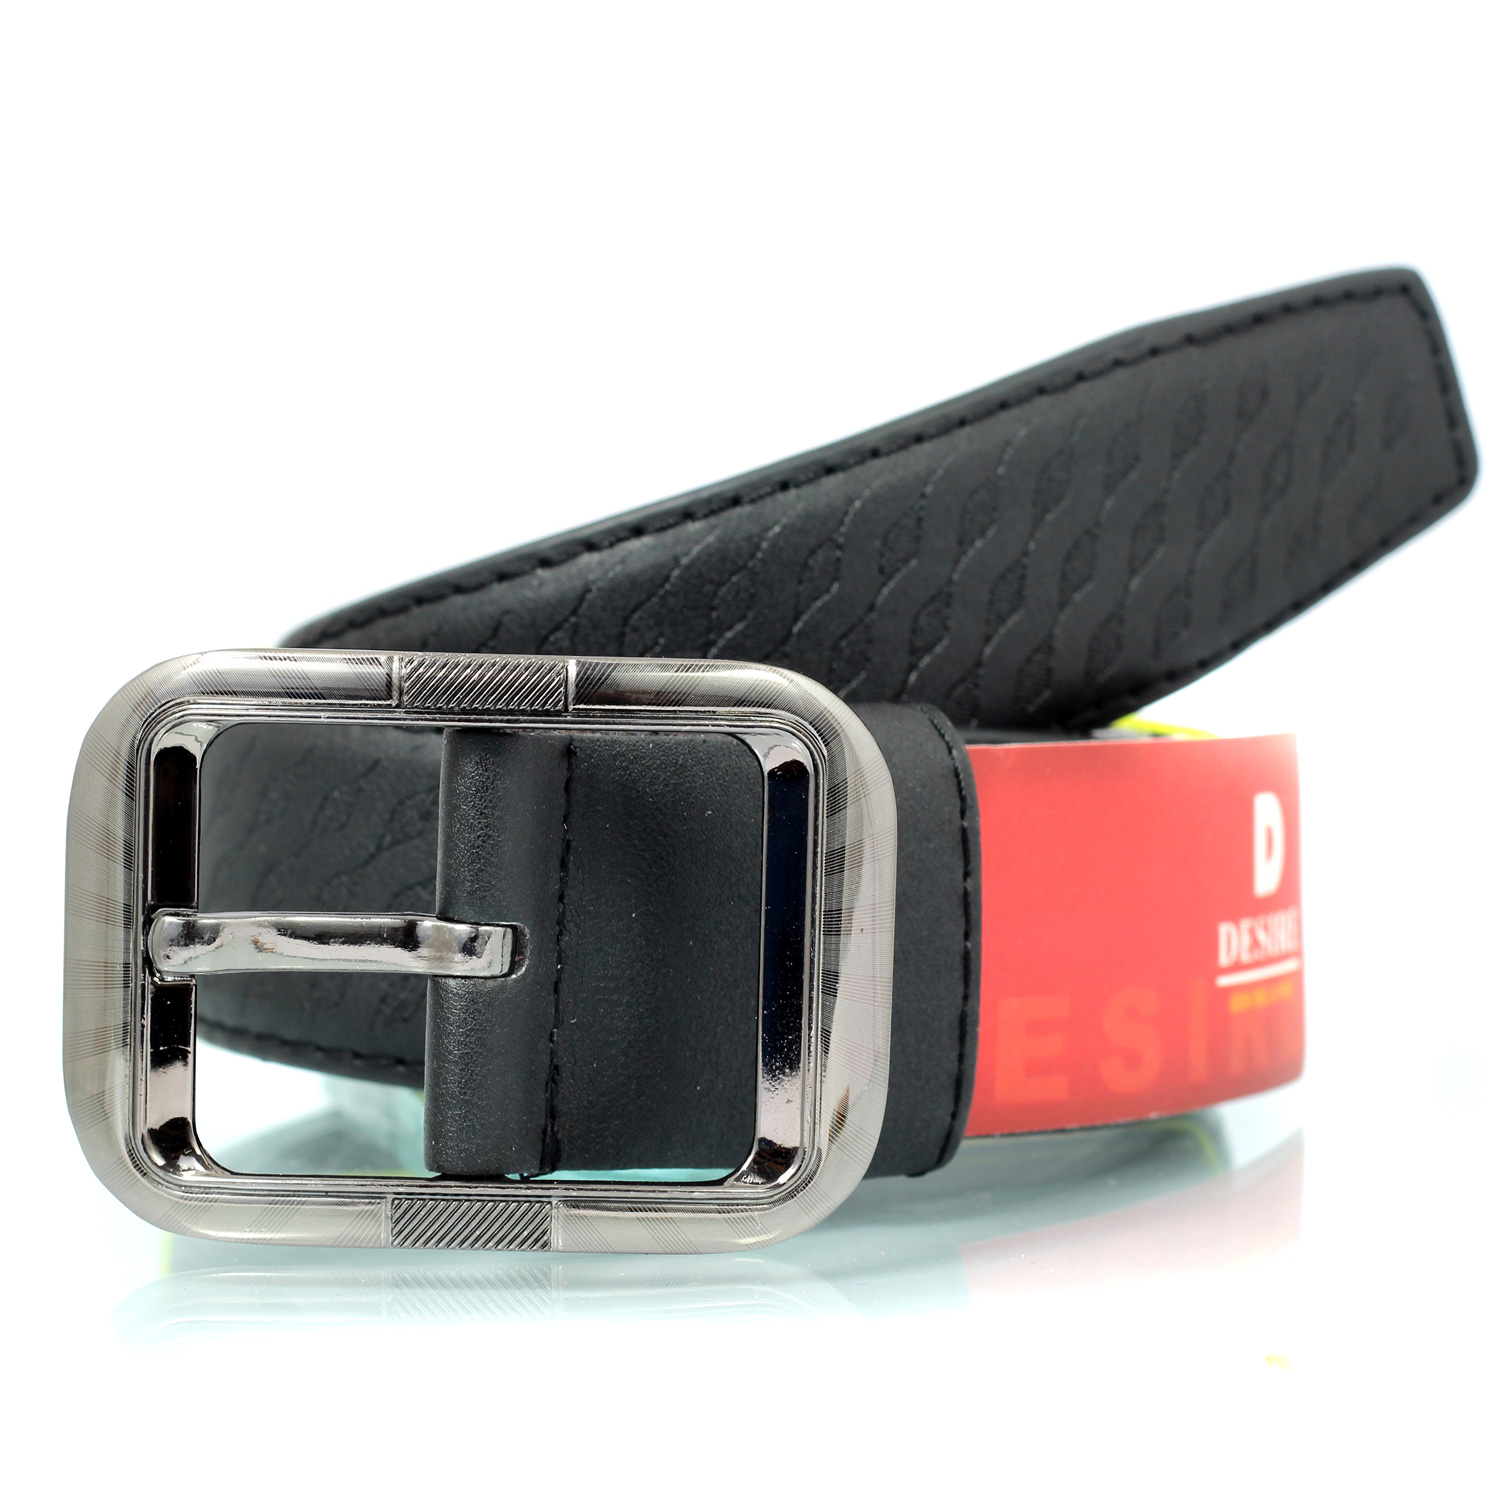 Zig-zag printed party and formal pure leather belt for men